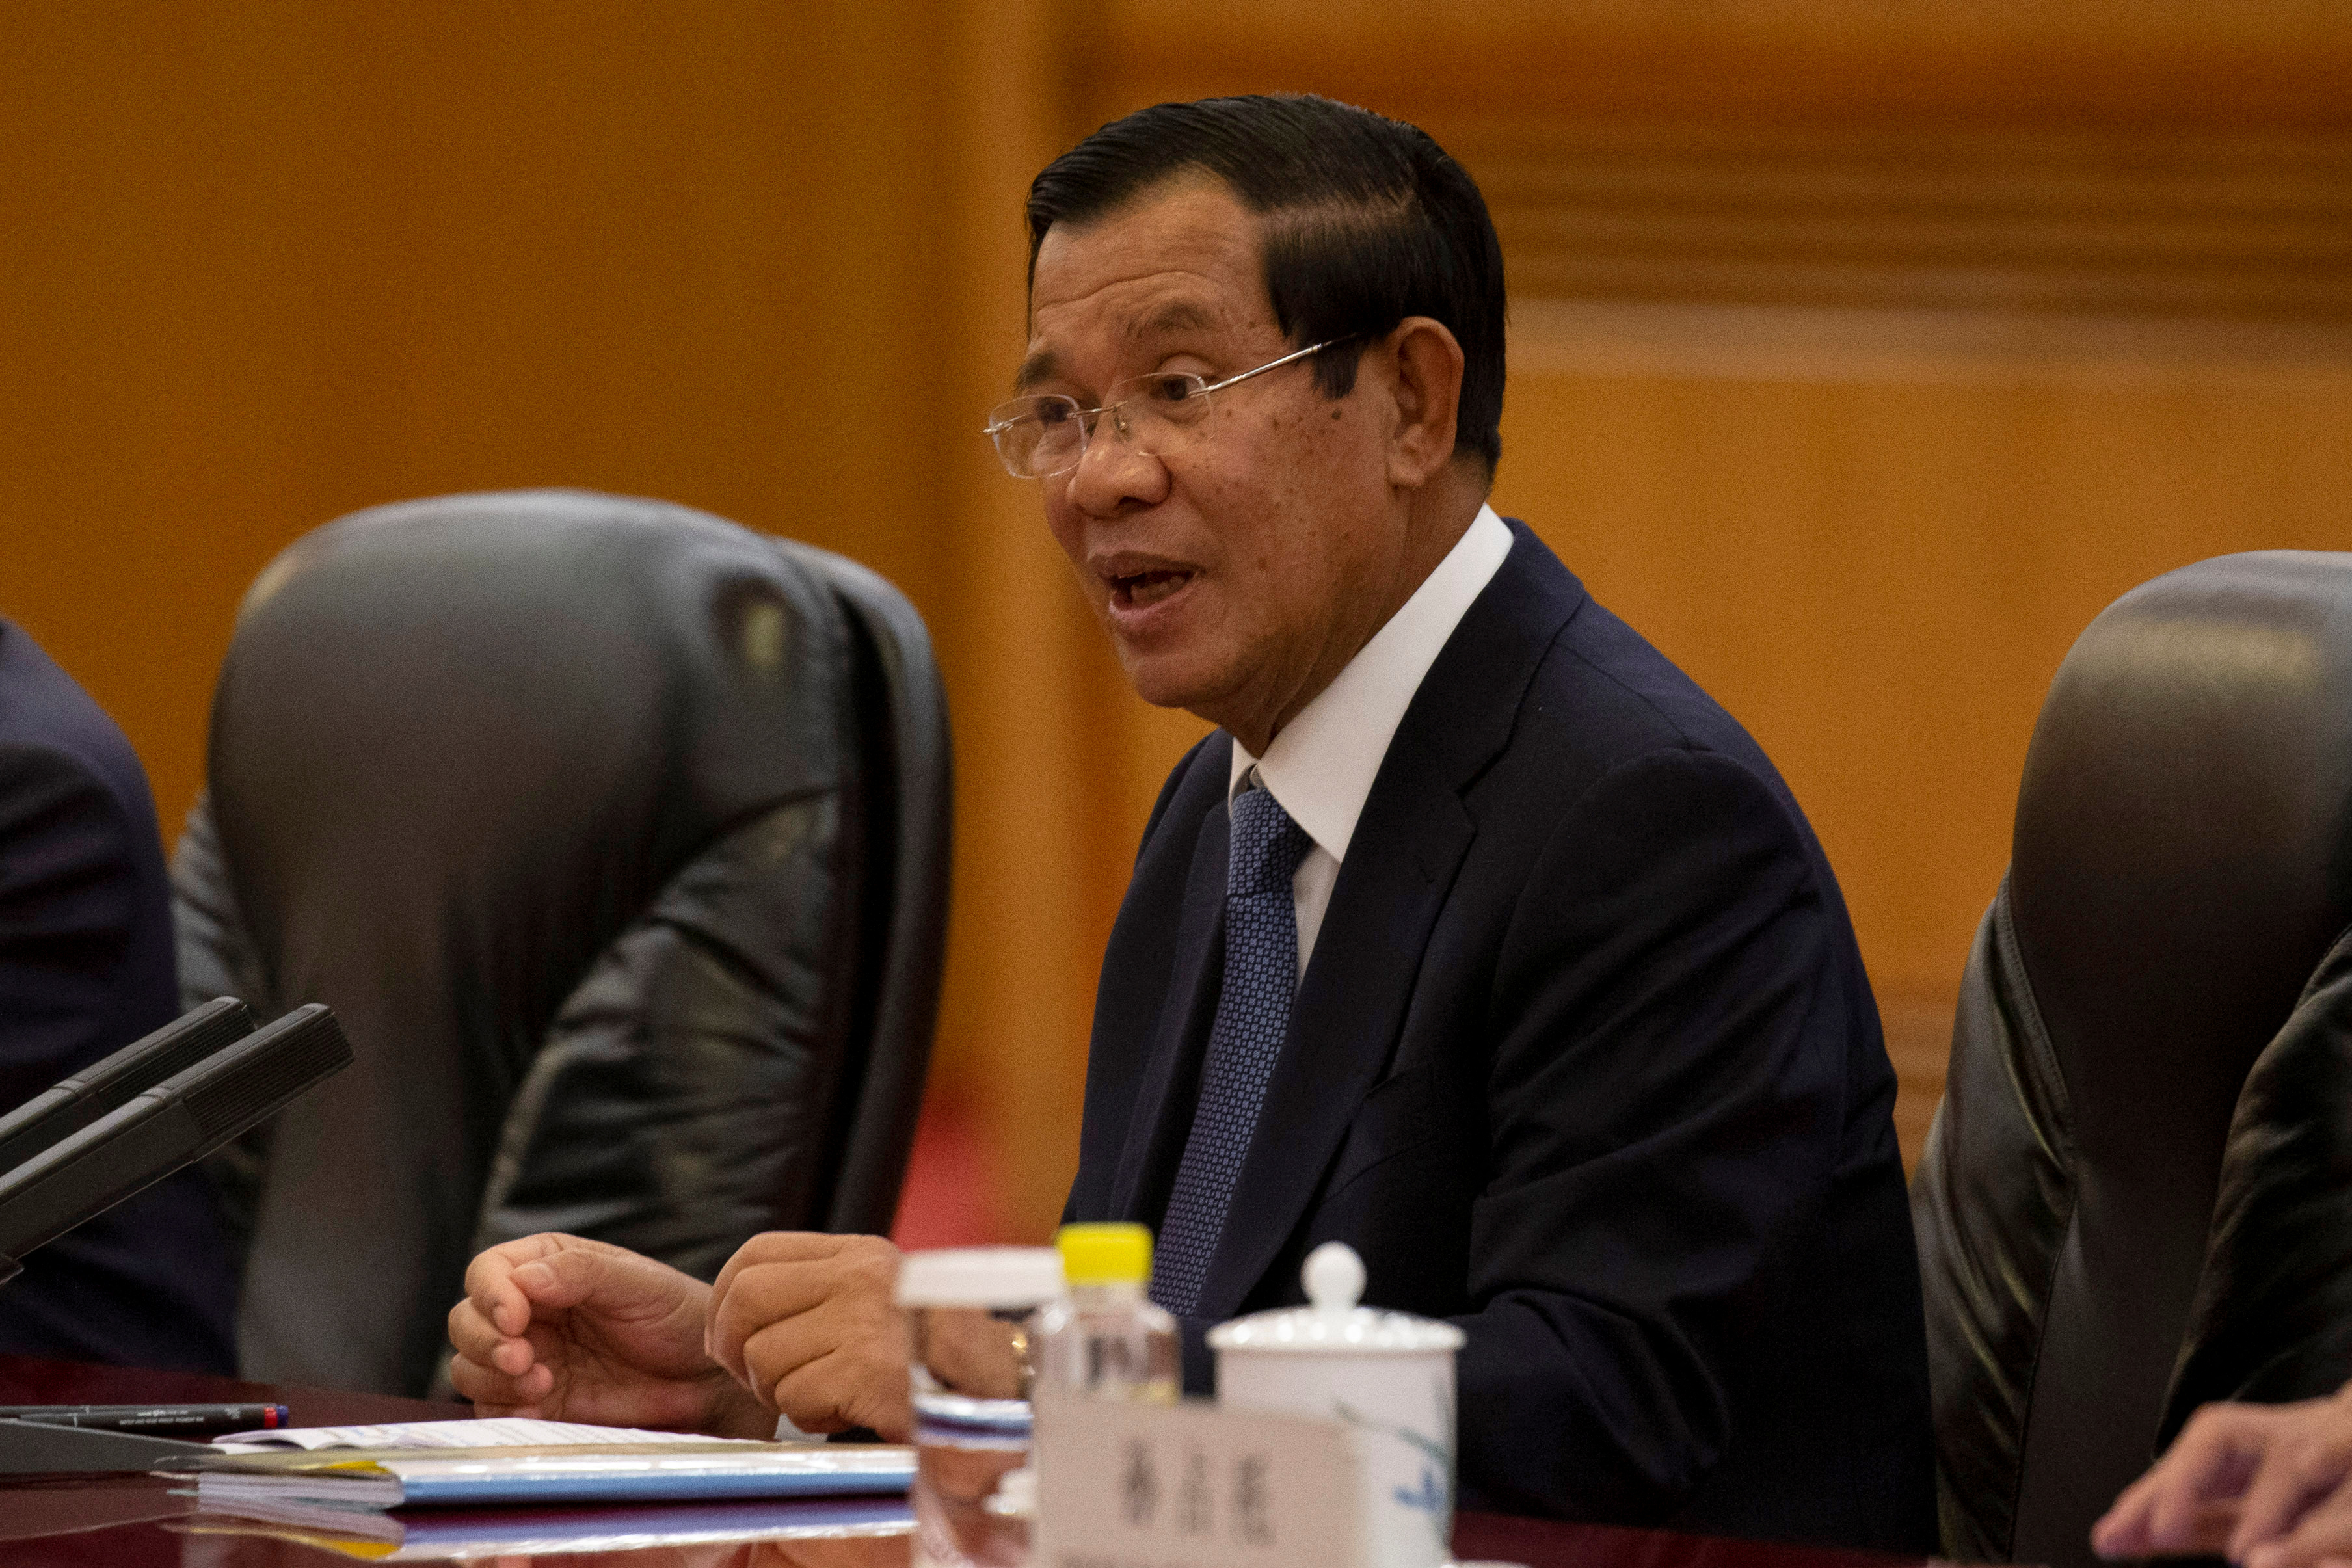 Cambodian Prime Minister Hun Sen speaks during a meeting with Chinese Premier Li Keqiang at the Great Hall of the People in Beijing